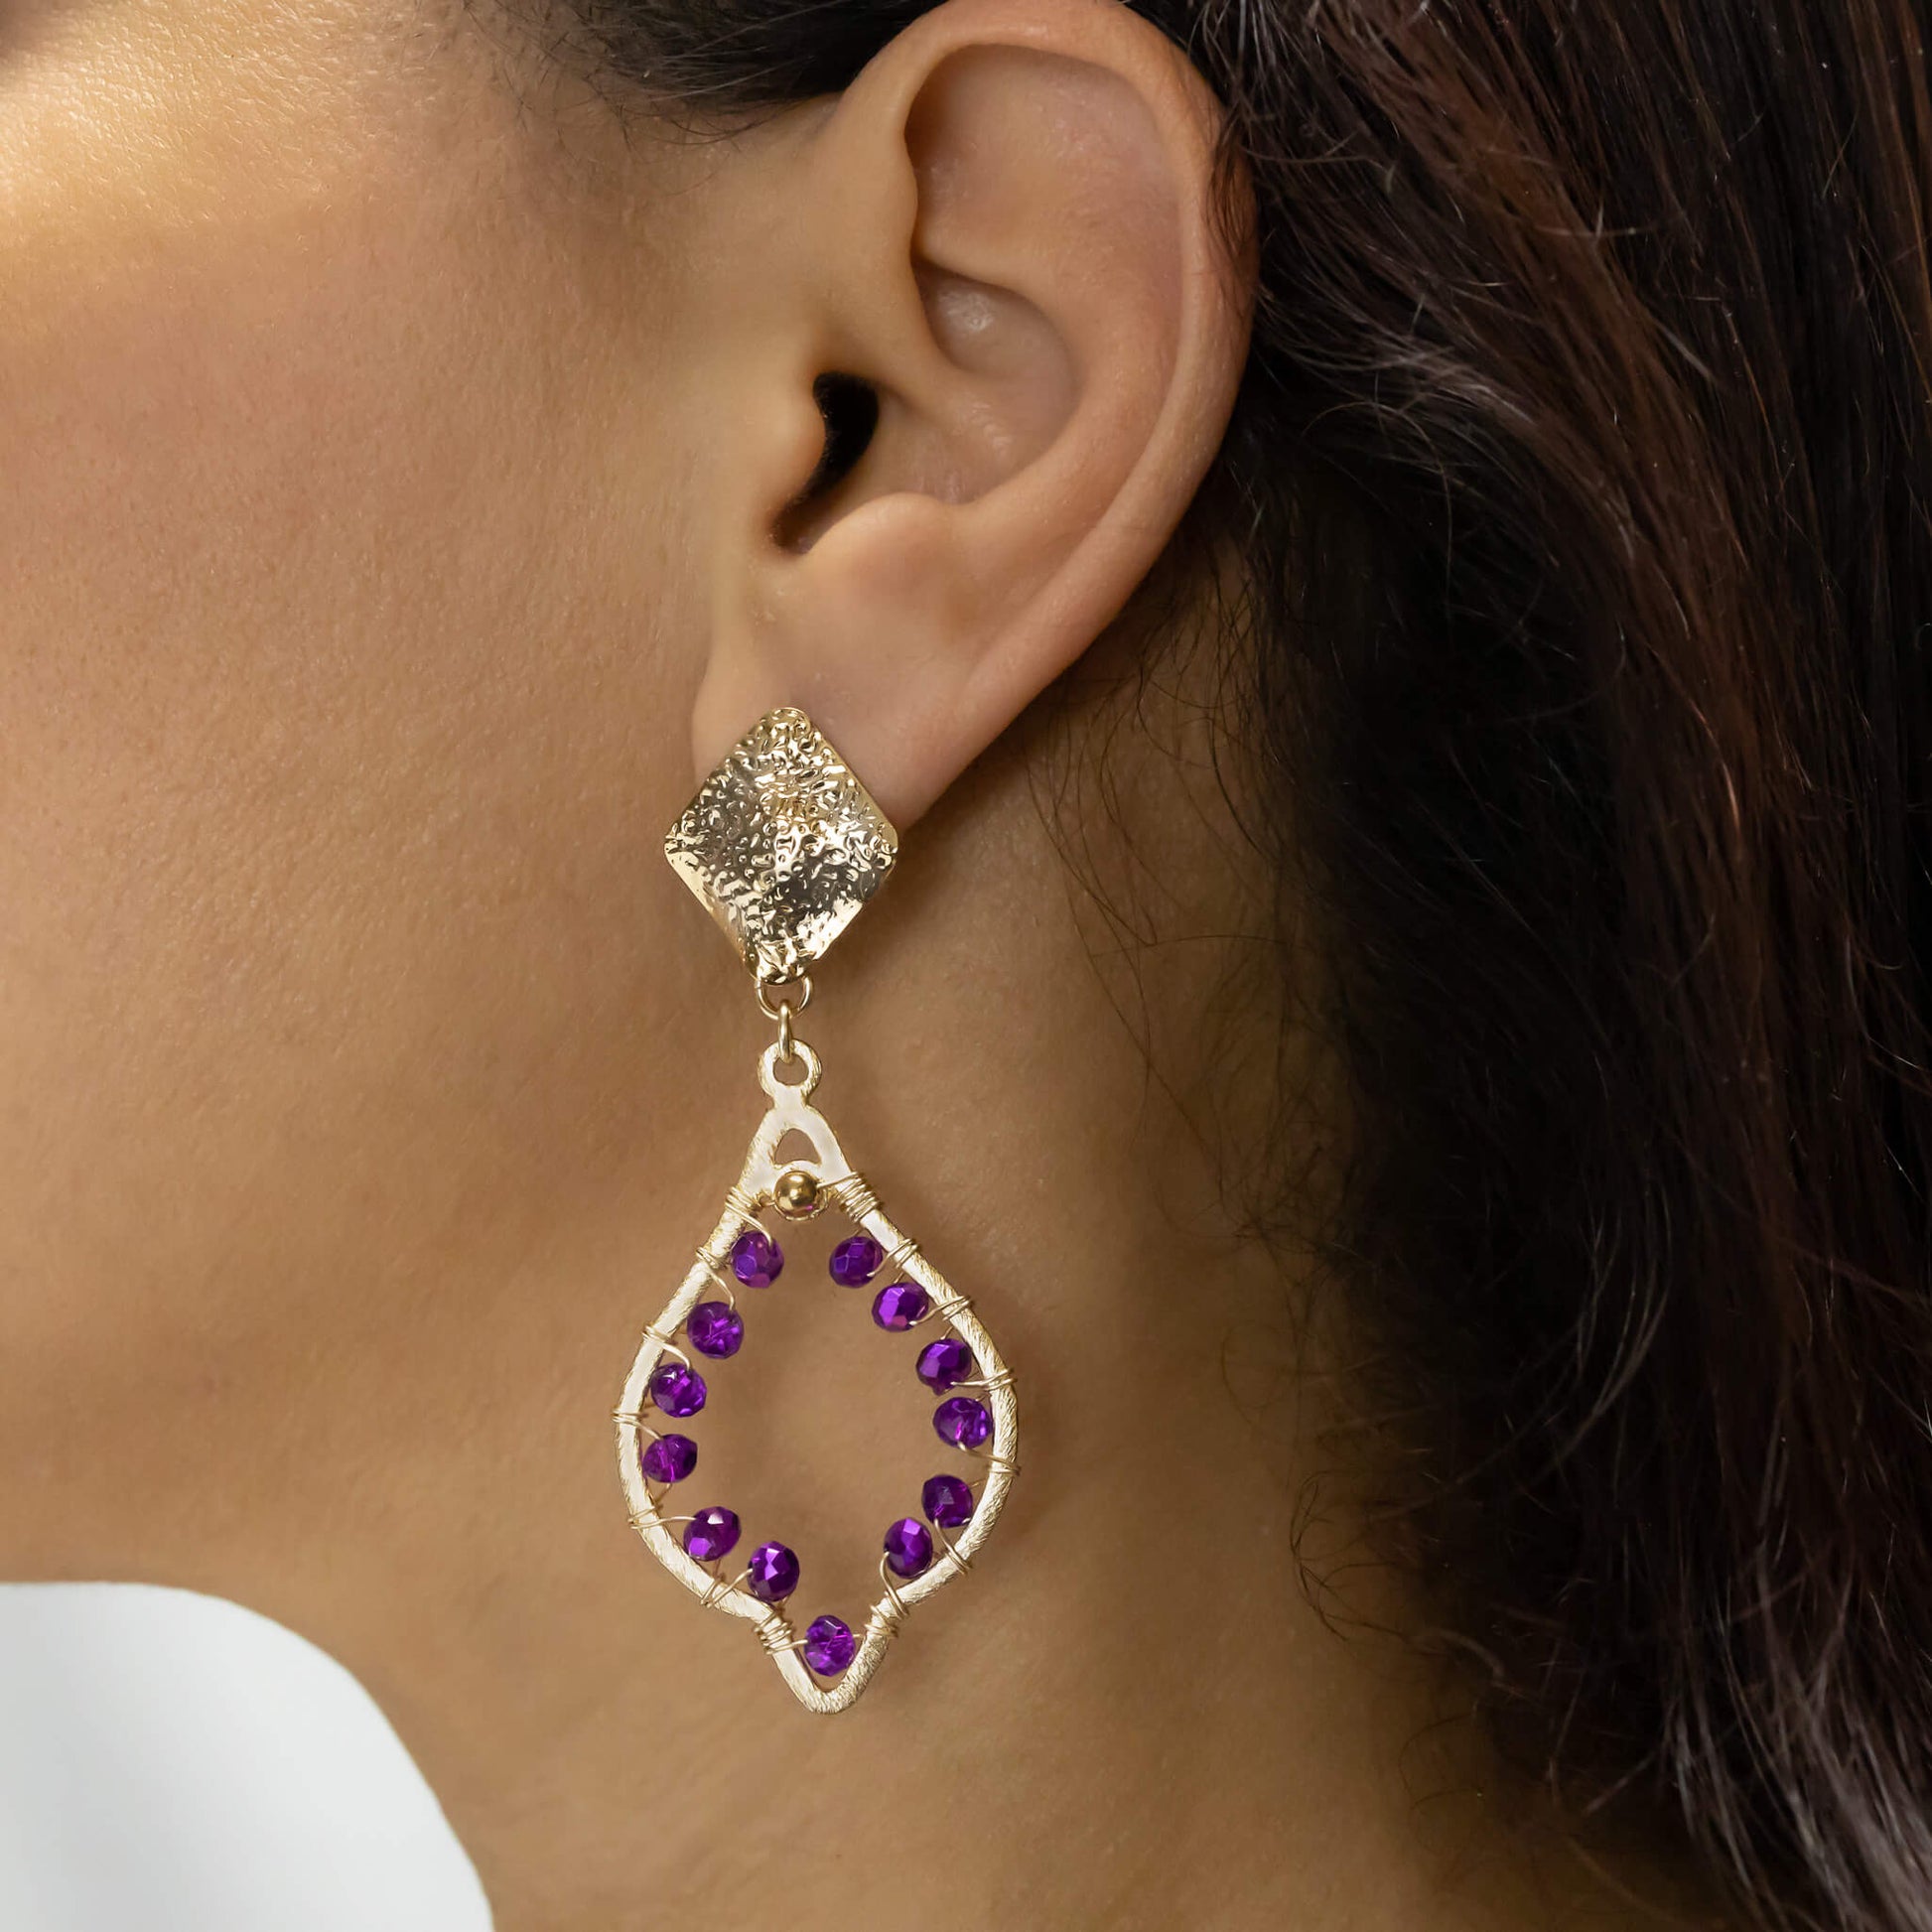 Chaima Earrings on a model. Gold Color Earrings with Purple Crystal Beads. Metal Frame & Wire Wrapped Earrings